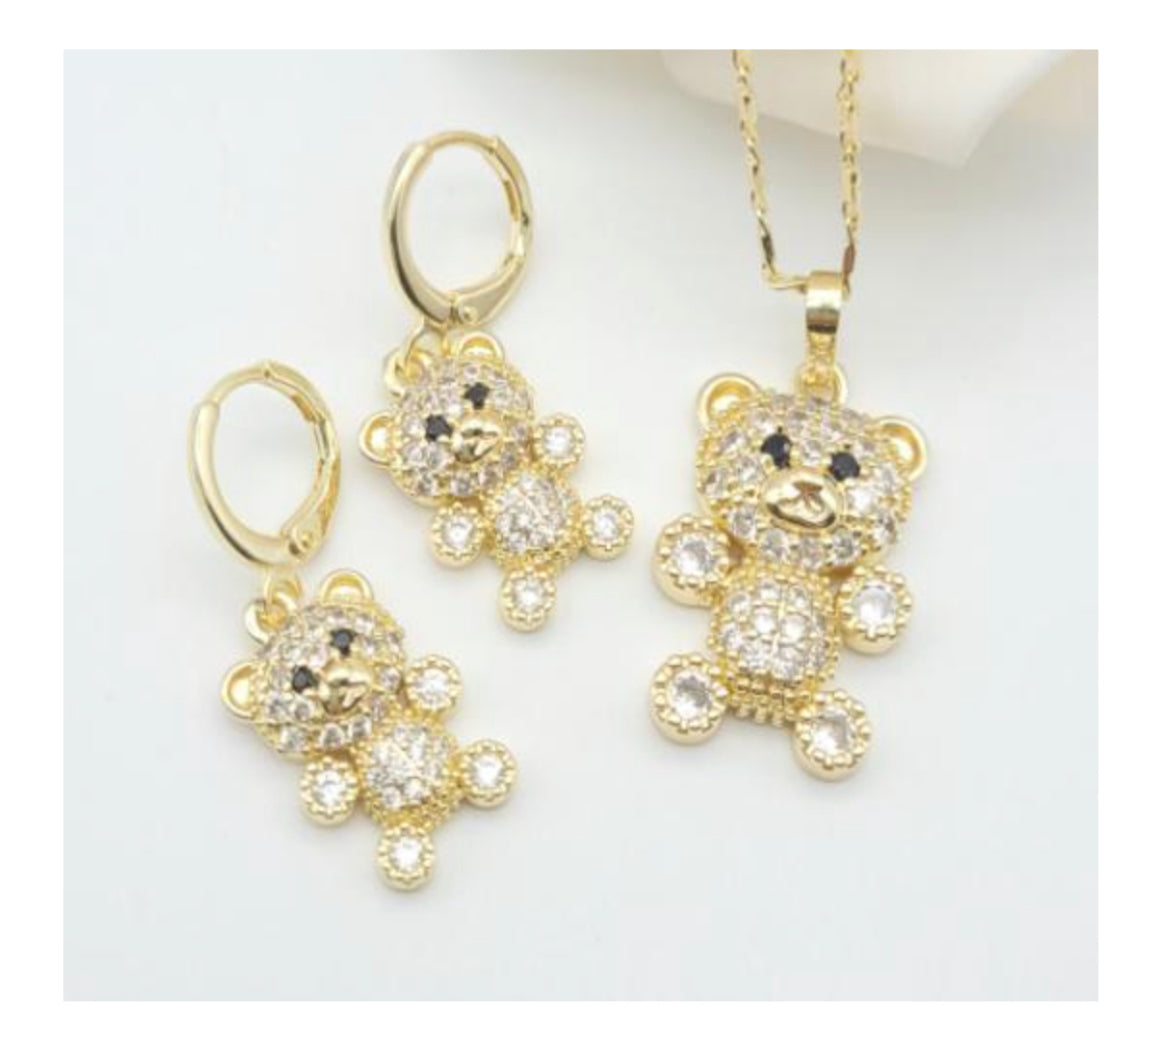 Teddy Bear Earrings And Necklace Set Gold Plated